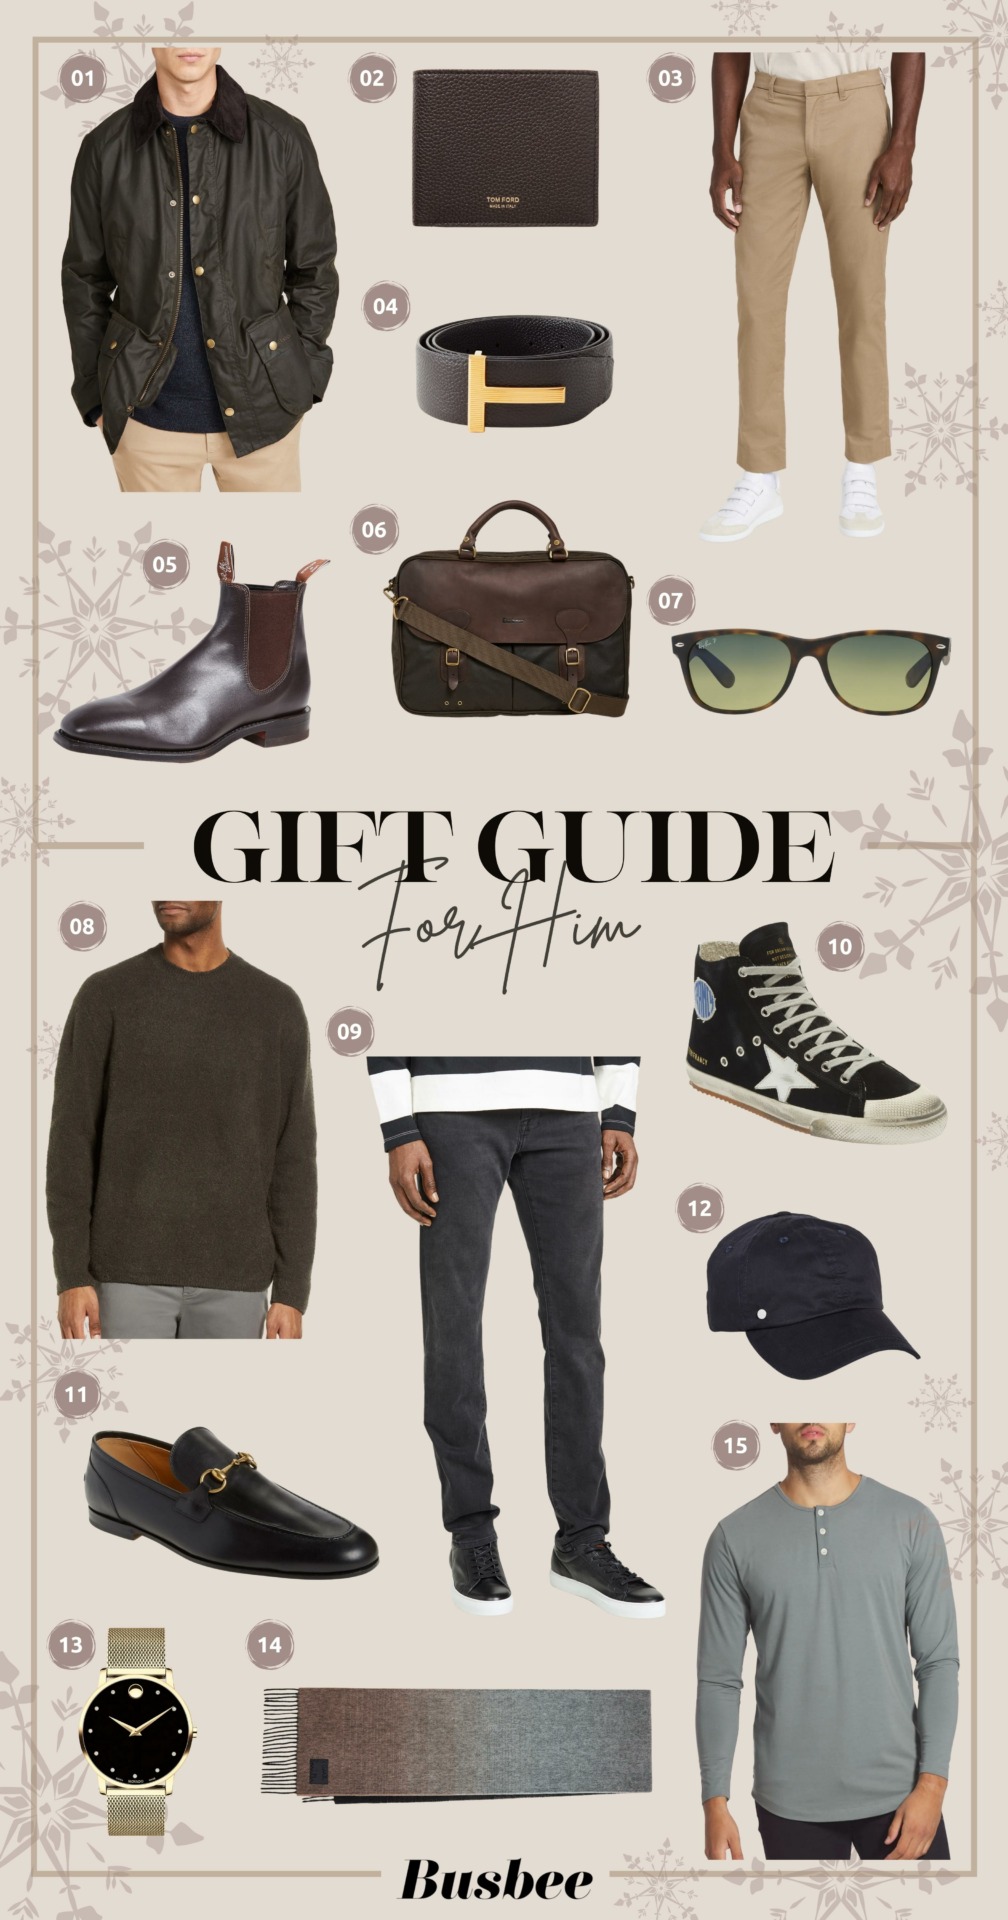 men's gift guide, what to buy men for holidays, holiday gifts for men, holiday gift guide for men, 2022 holiday gifts, 2022 gifts for men, christmas gifts for men, men's gifts, what to buy men, gifts for dad, gifts for husband, gifts for son, erin busbee, holiday 2022, gifts for the well dressed man, stylish man gifts